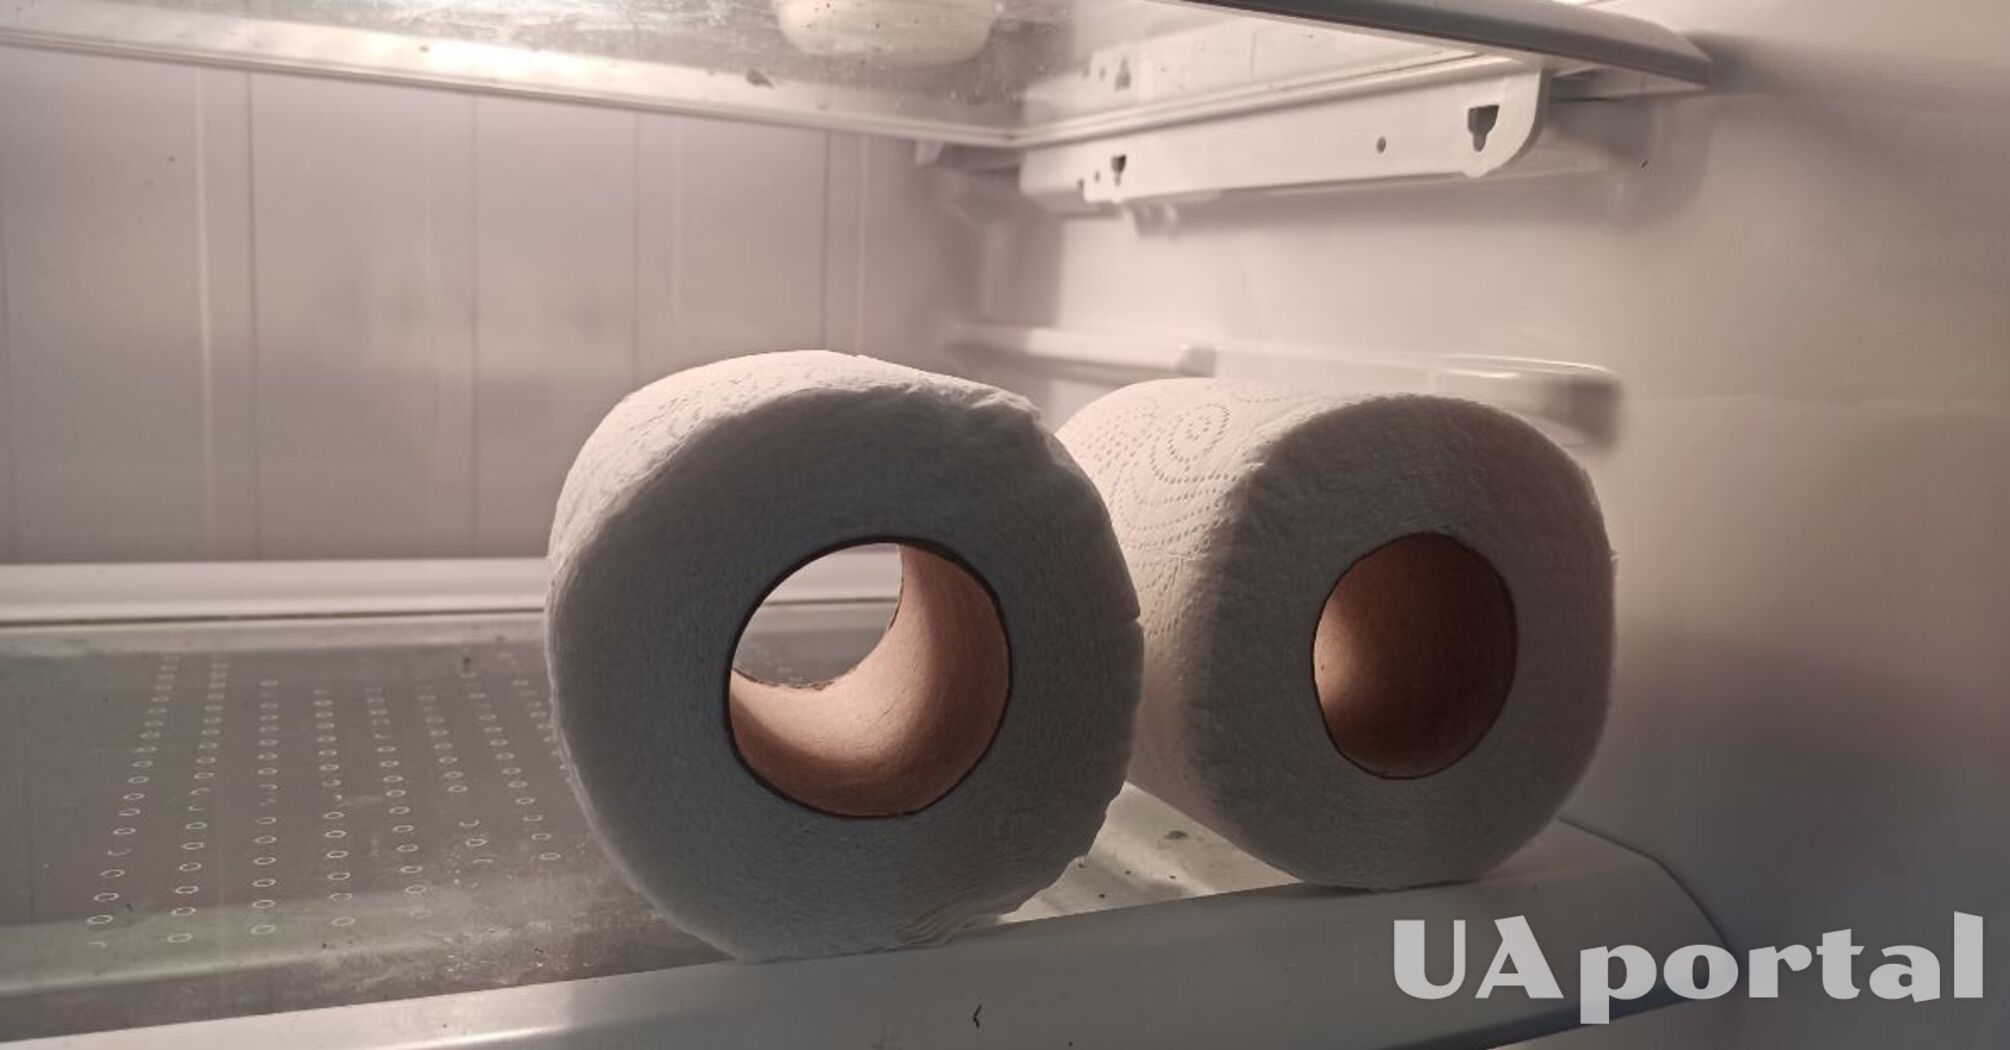 Why experienced owners put a roll of toilet paper in the refrigerator